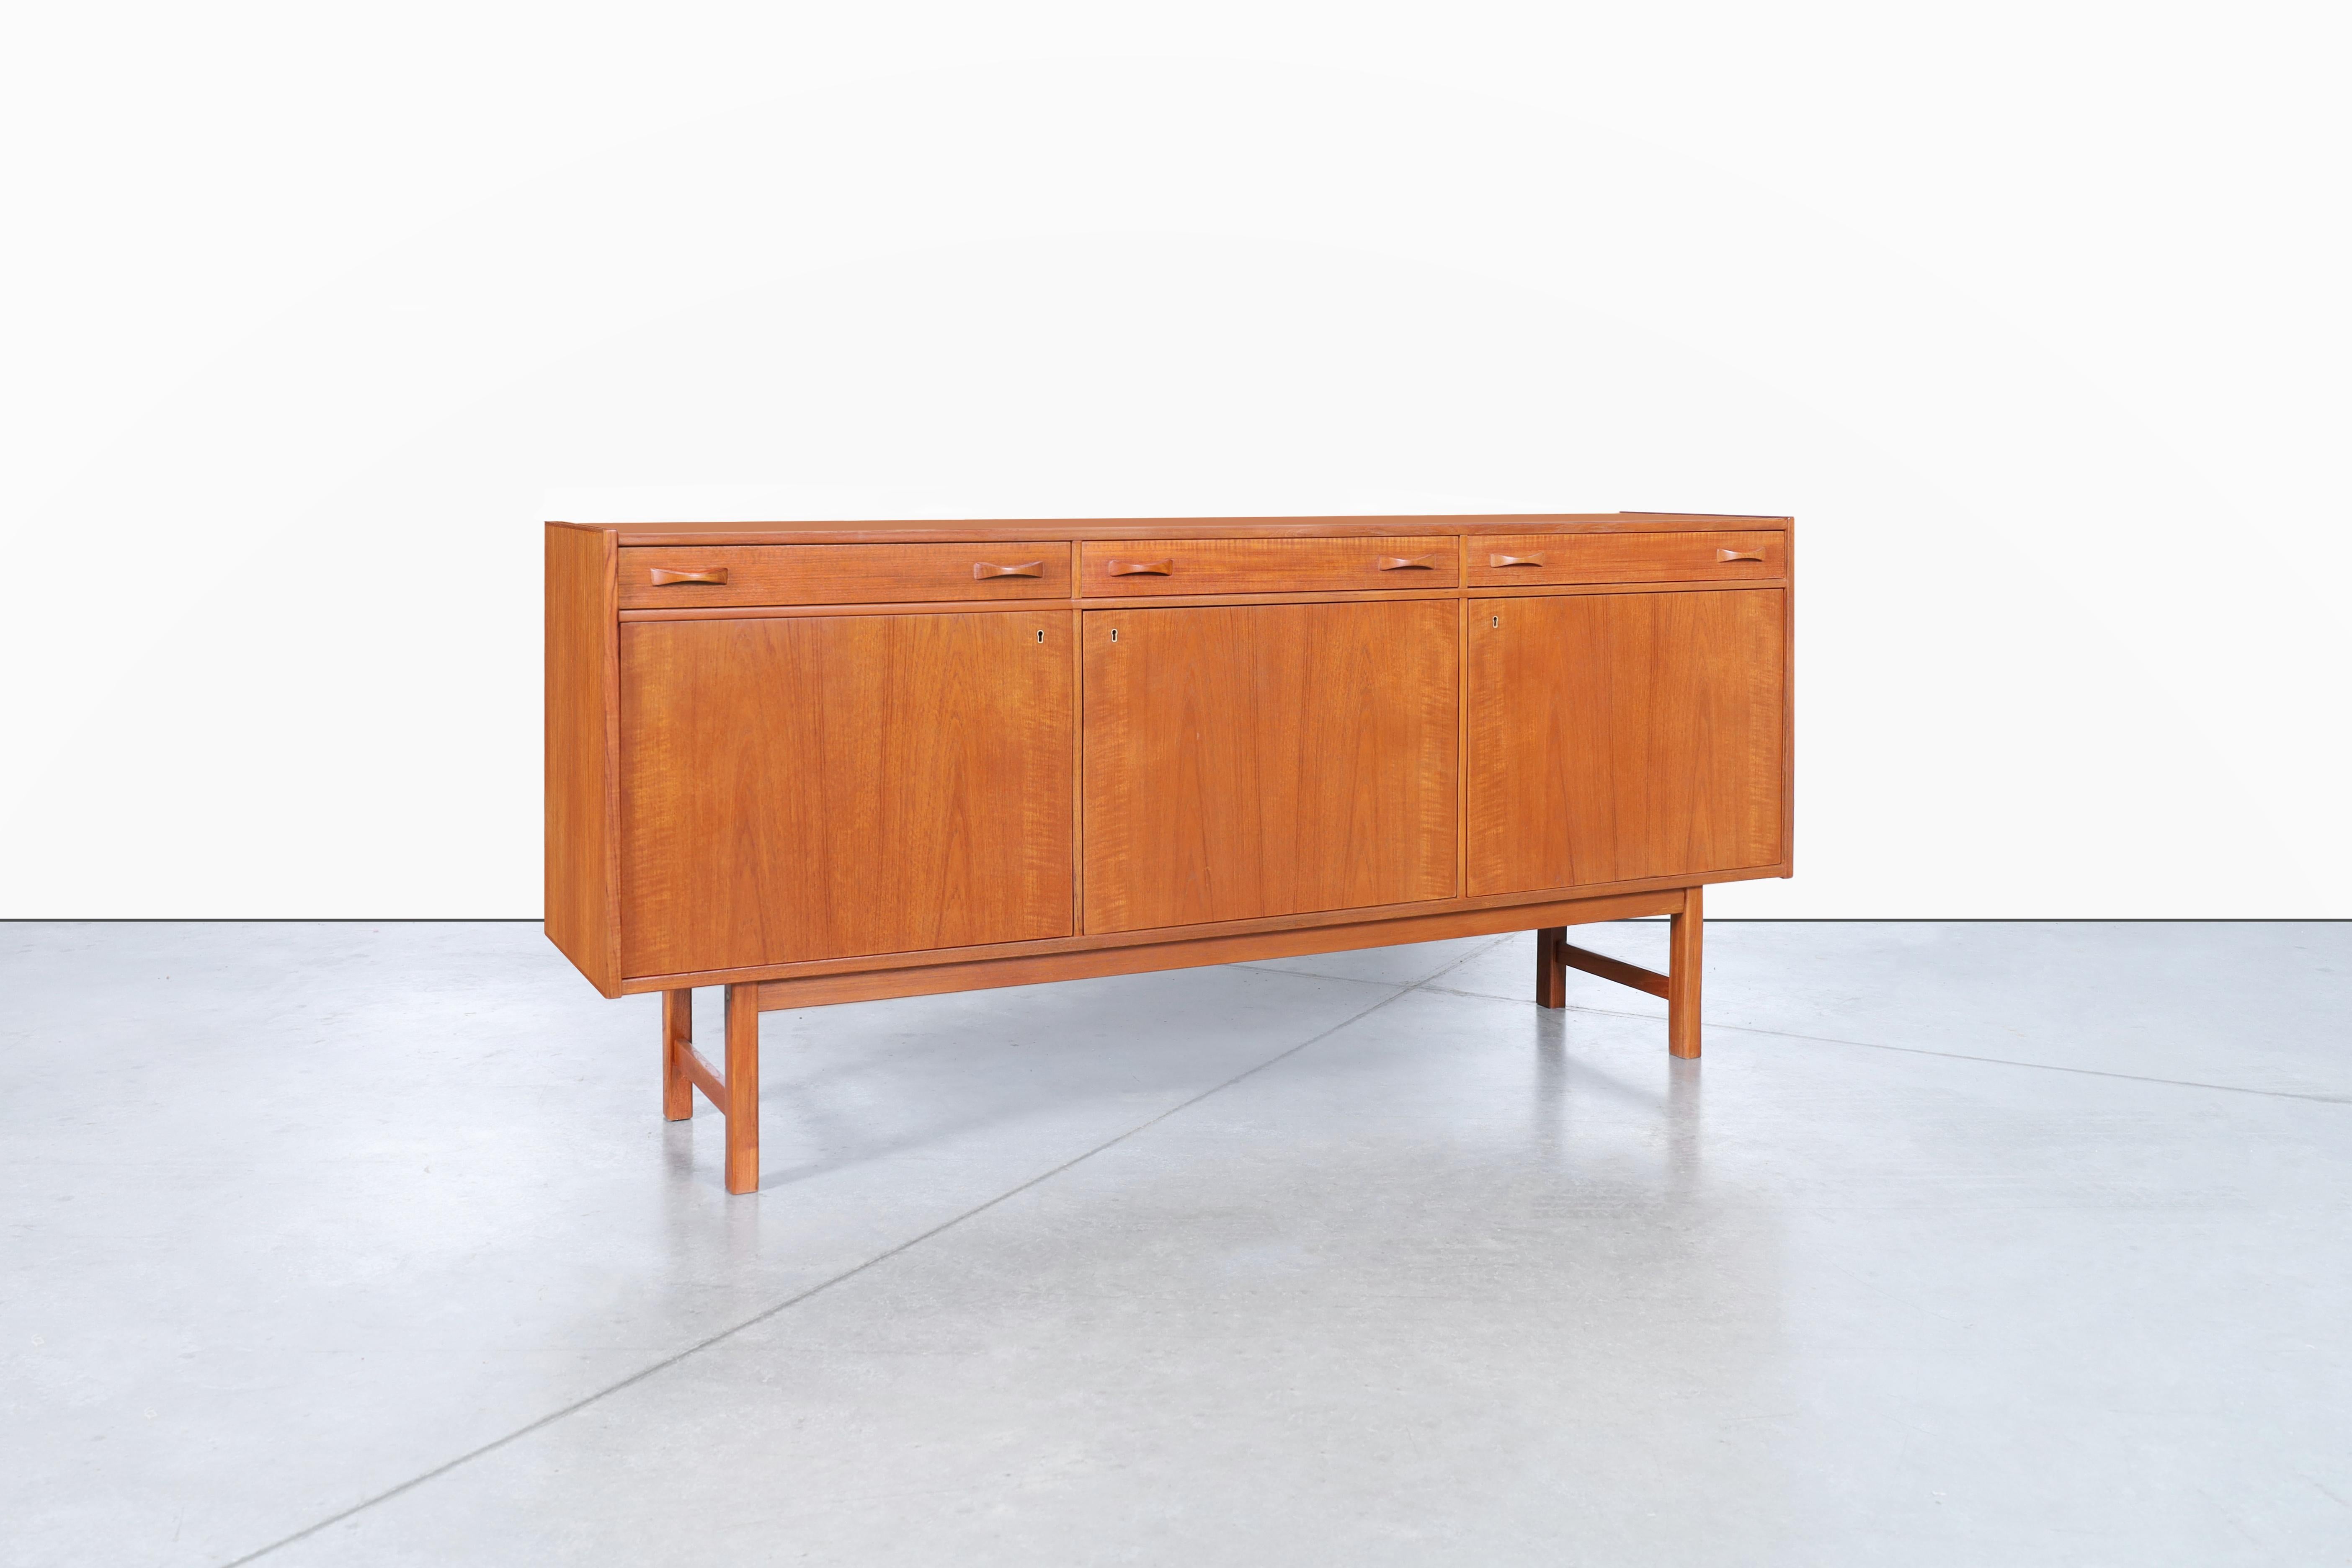 This mid-century teak credenza, designed by Tage Olofsson for Ulferts Mobler in Sweden during the 1960s, is a stunning piece of furniture crafted from the finest quality teak wood. Its elegant and characteristic Scandinavian design consists of three